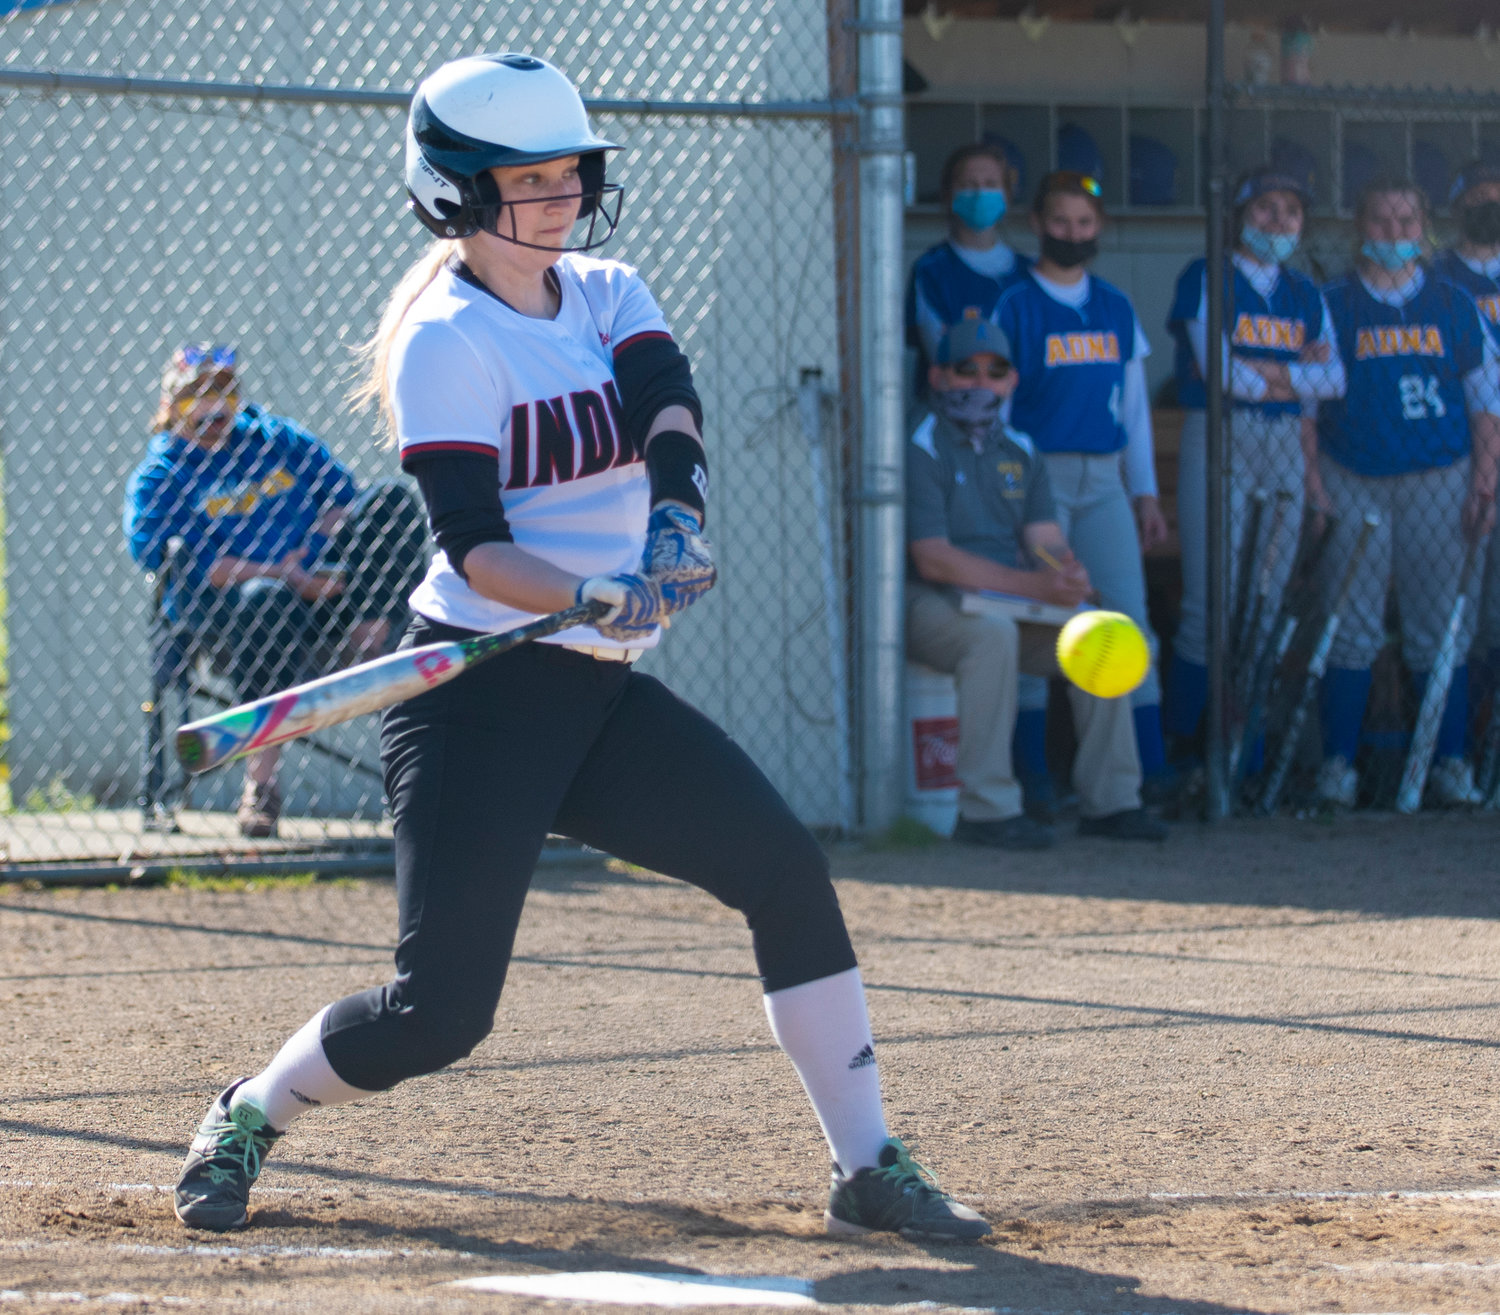 Toledo's Greenlee Clark lines up an Adna pitch on Monday.